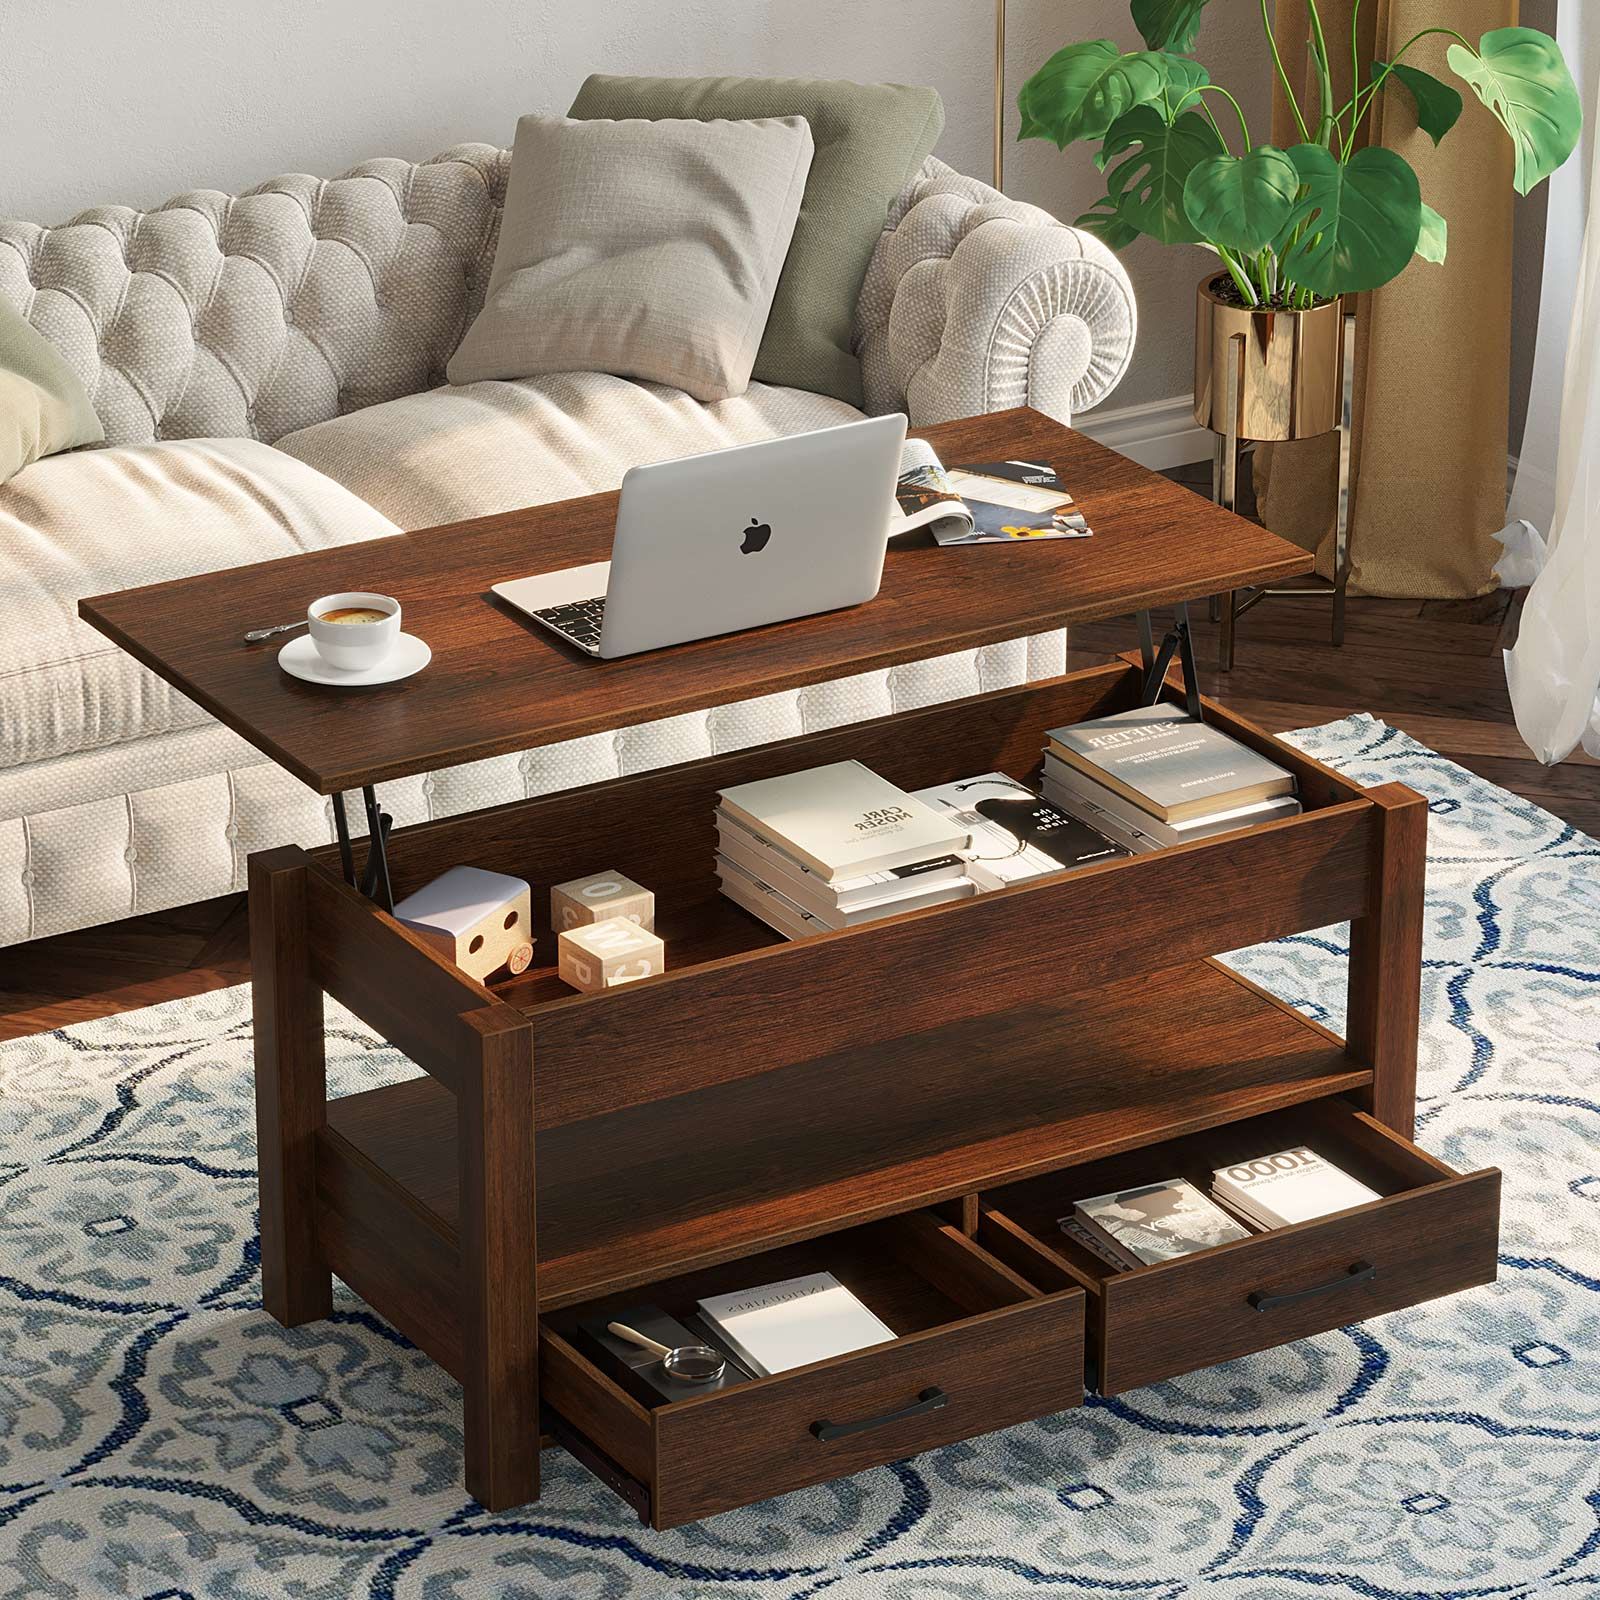 Rolanstar Coffee Table, Lift Top Coffee Table With Drawers And Hidden For Most Popular Lift Top Coffee Tables With Storage Drawers (View 11 of 15)